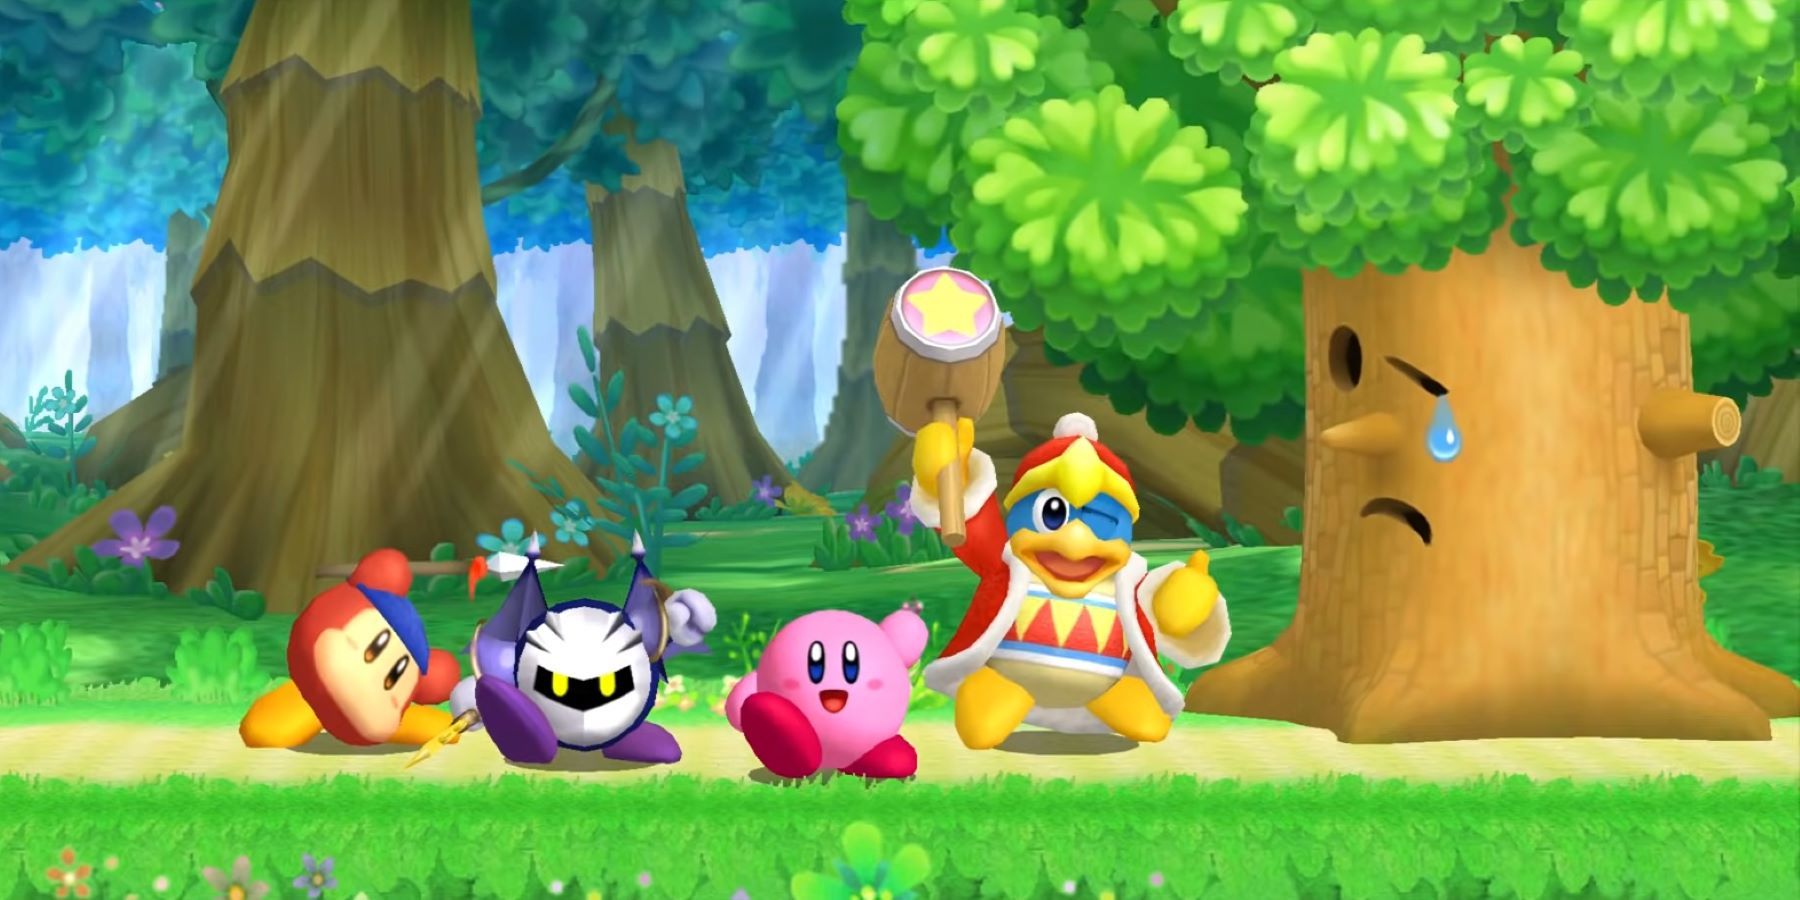 Kirby, Meta Knight, King Dedede, and Bandana Waddle Dee after defeating Whispy Woods in Kirby's Return to Dream Land